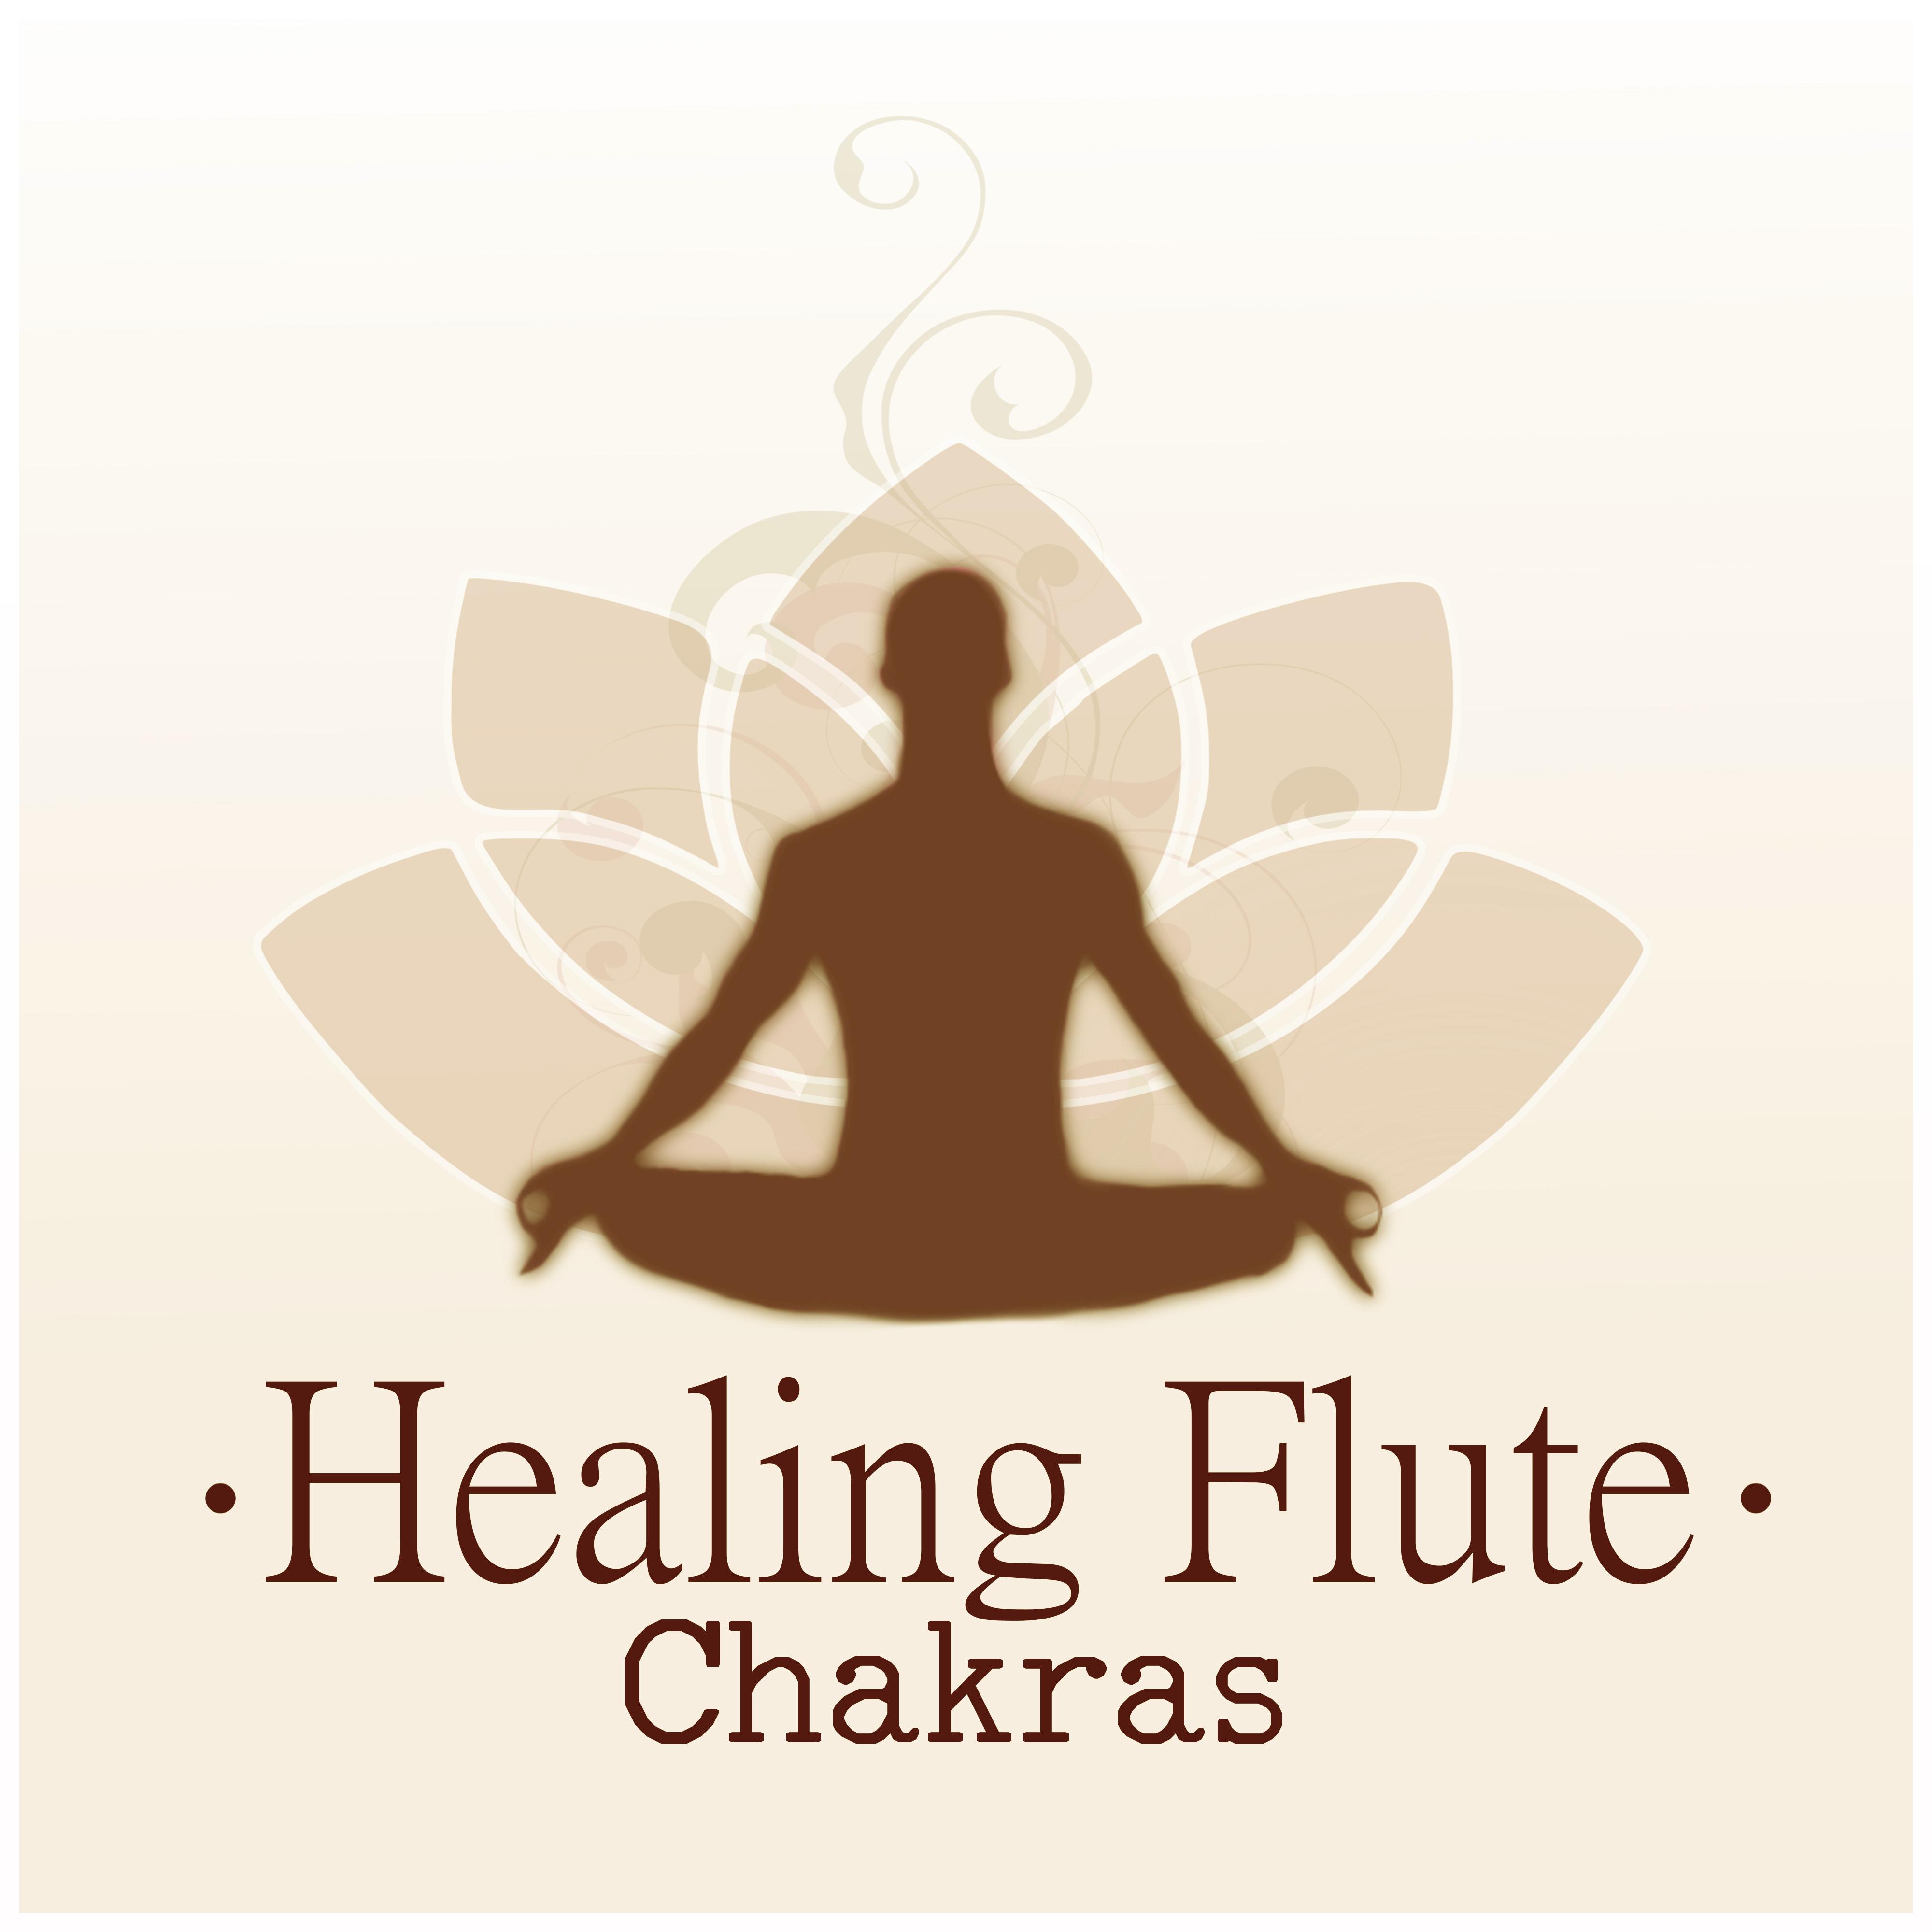 Healing Flute Chakras - Good Time with New Age, Background Music and Relaxation Sounds, Total Chill Out Music, My Time, Music for Good Day